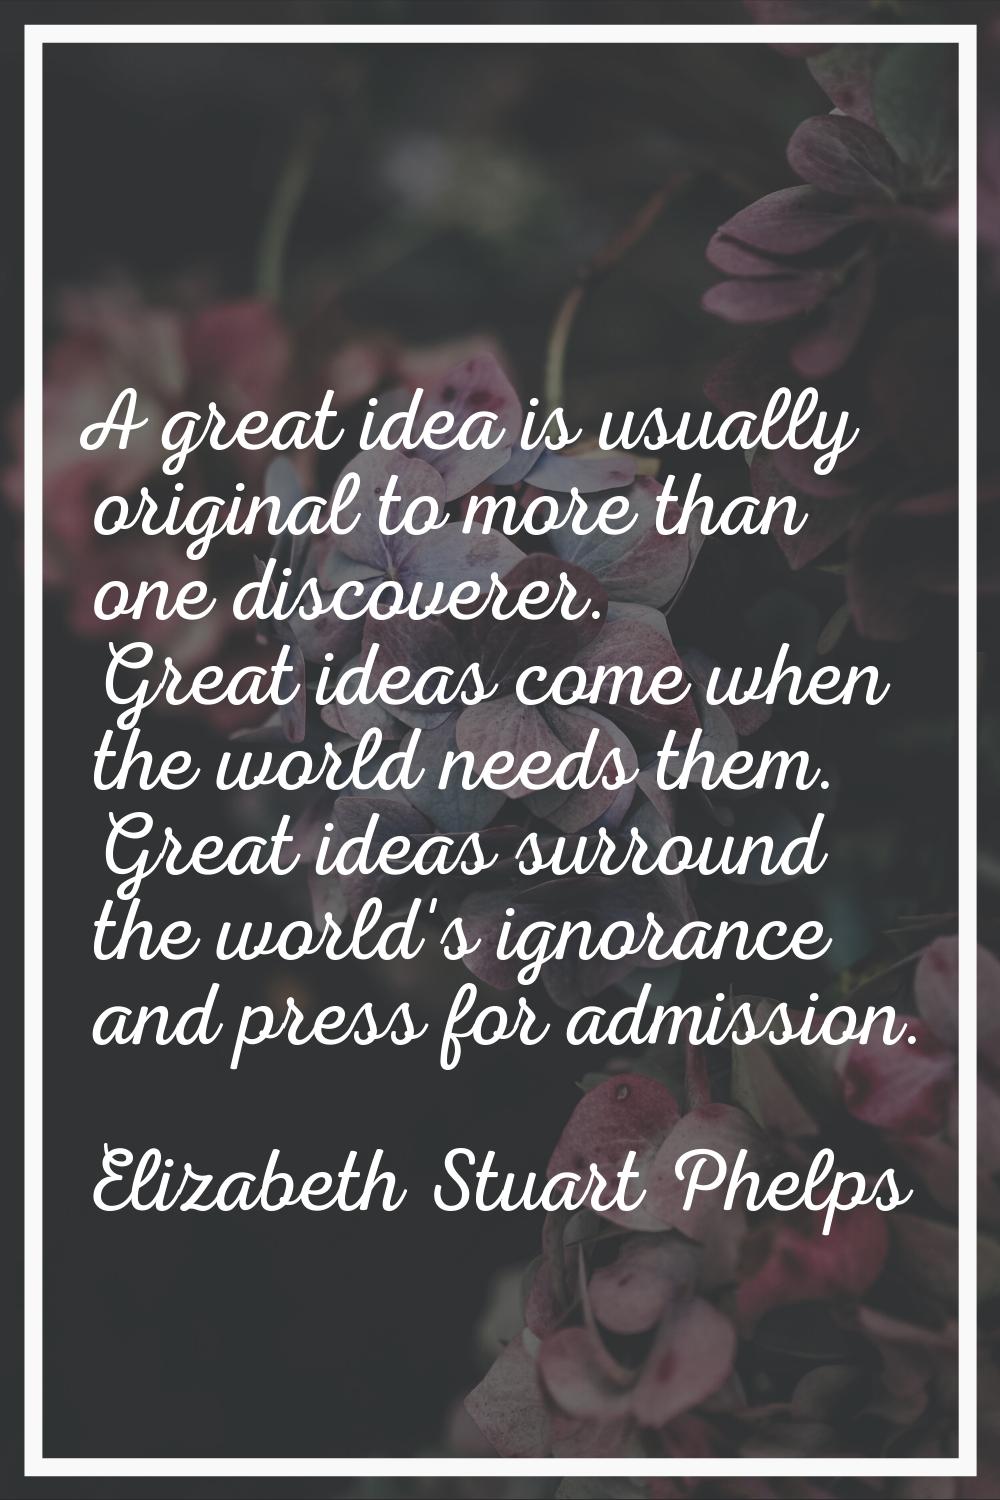 A great idea is usually original to more than one discoverer. Great ideas come when the world needs